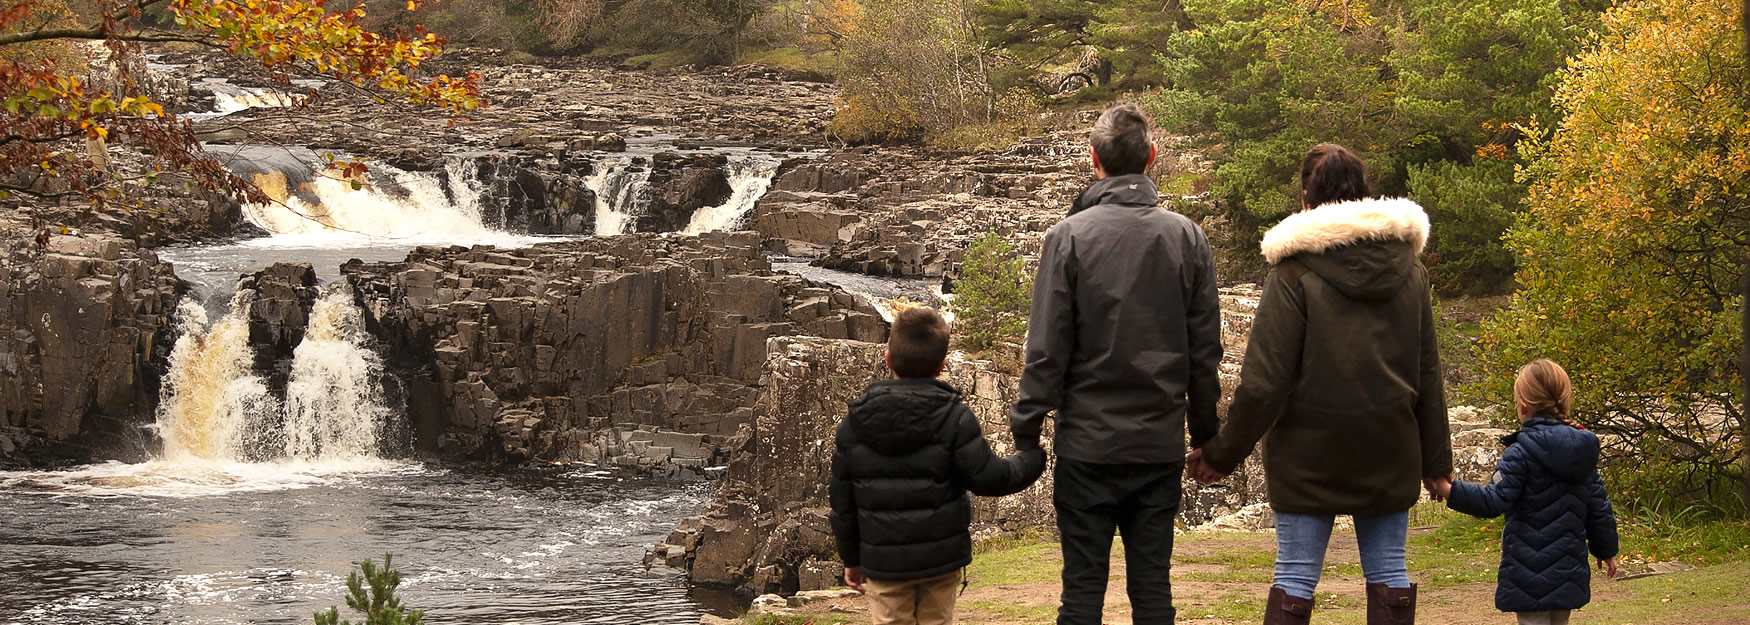 Low Force in Durham